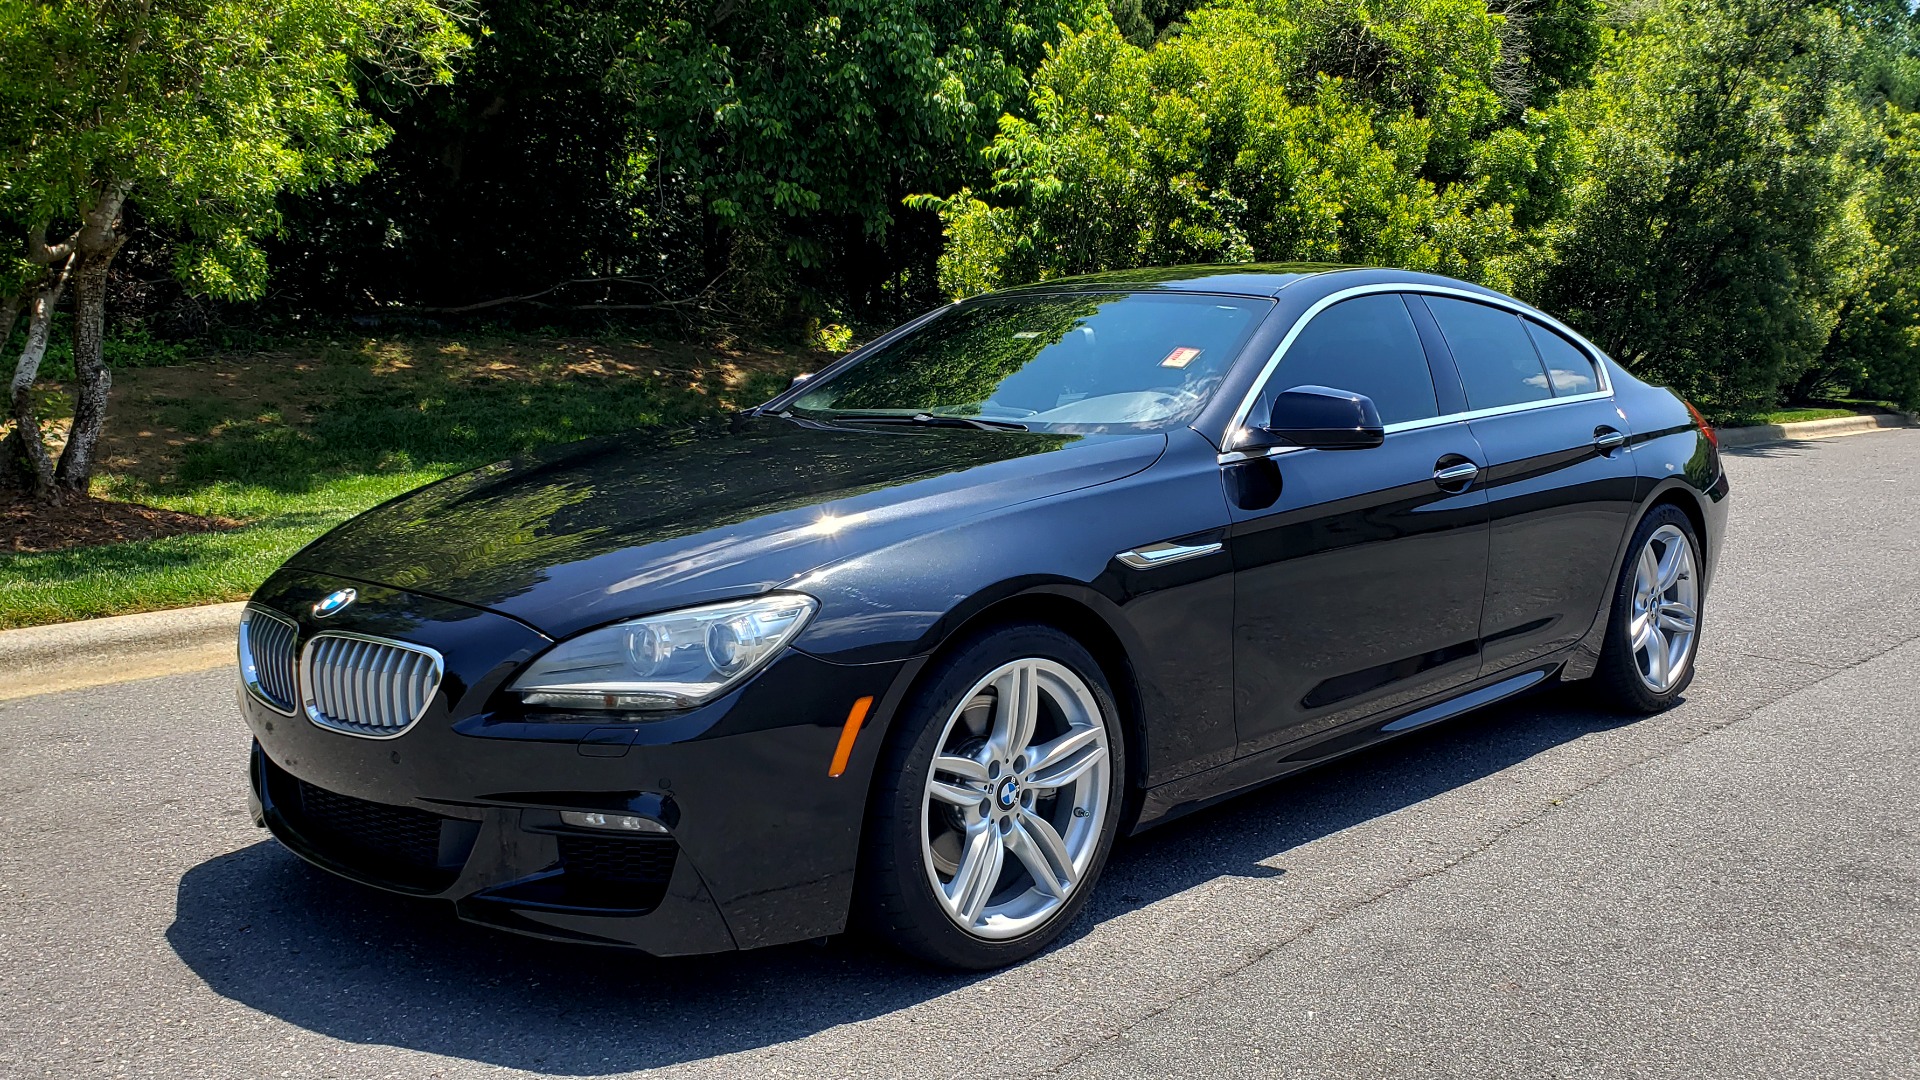 Used 2013 BMW 6 SERIES 650I GRANCOUPE / M-SPORT / LUXURY / NAV / SUNROOF / HTD STS for sale Sold at Formula Imports in Charlotte NC 28227 1